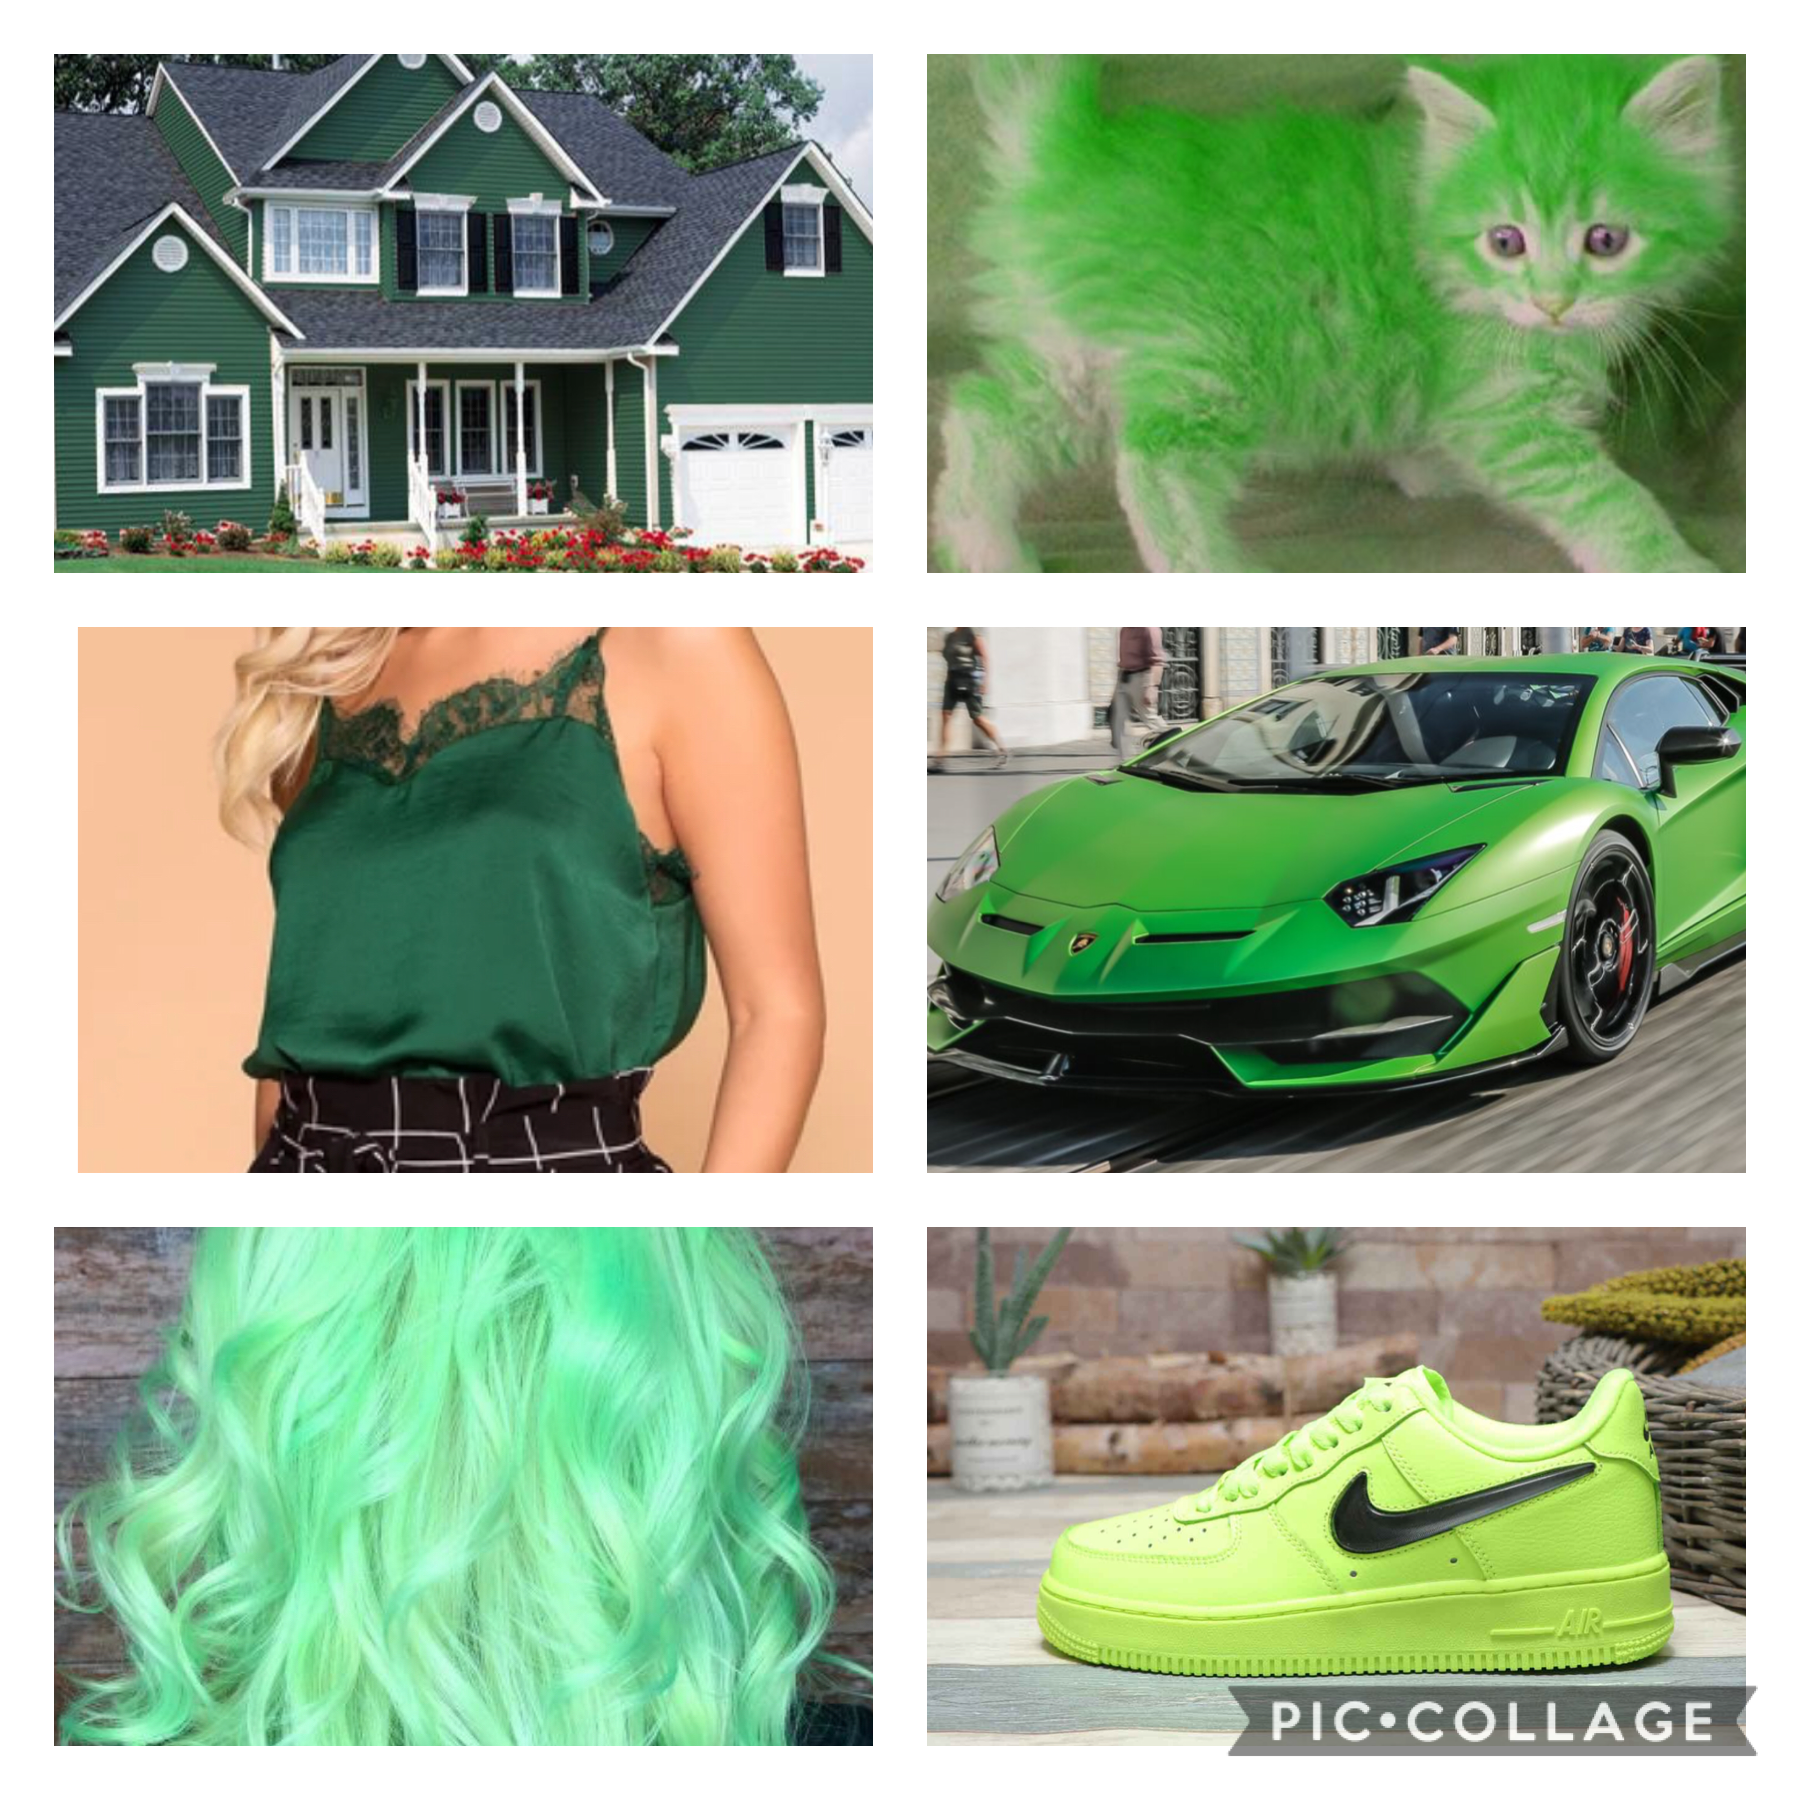 Your favorite color green